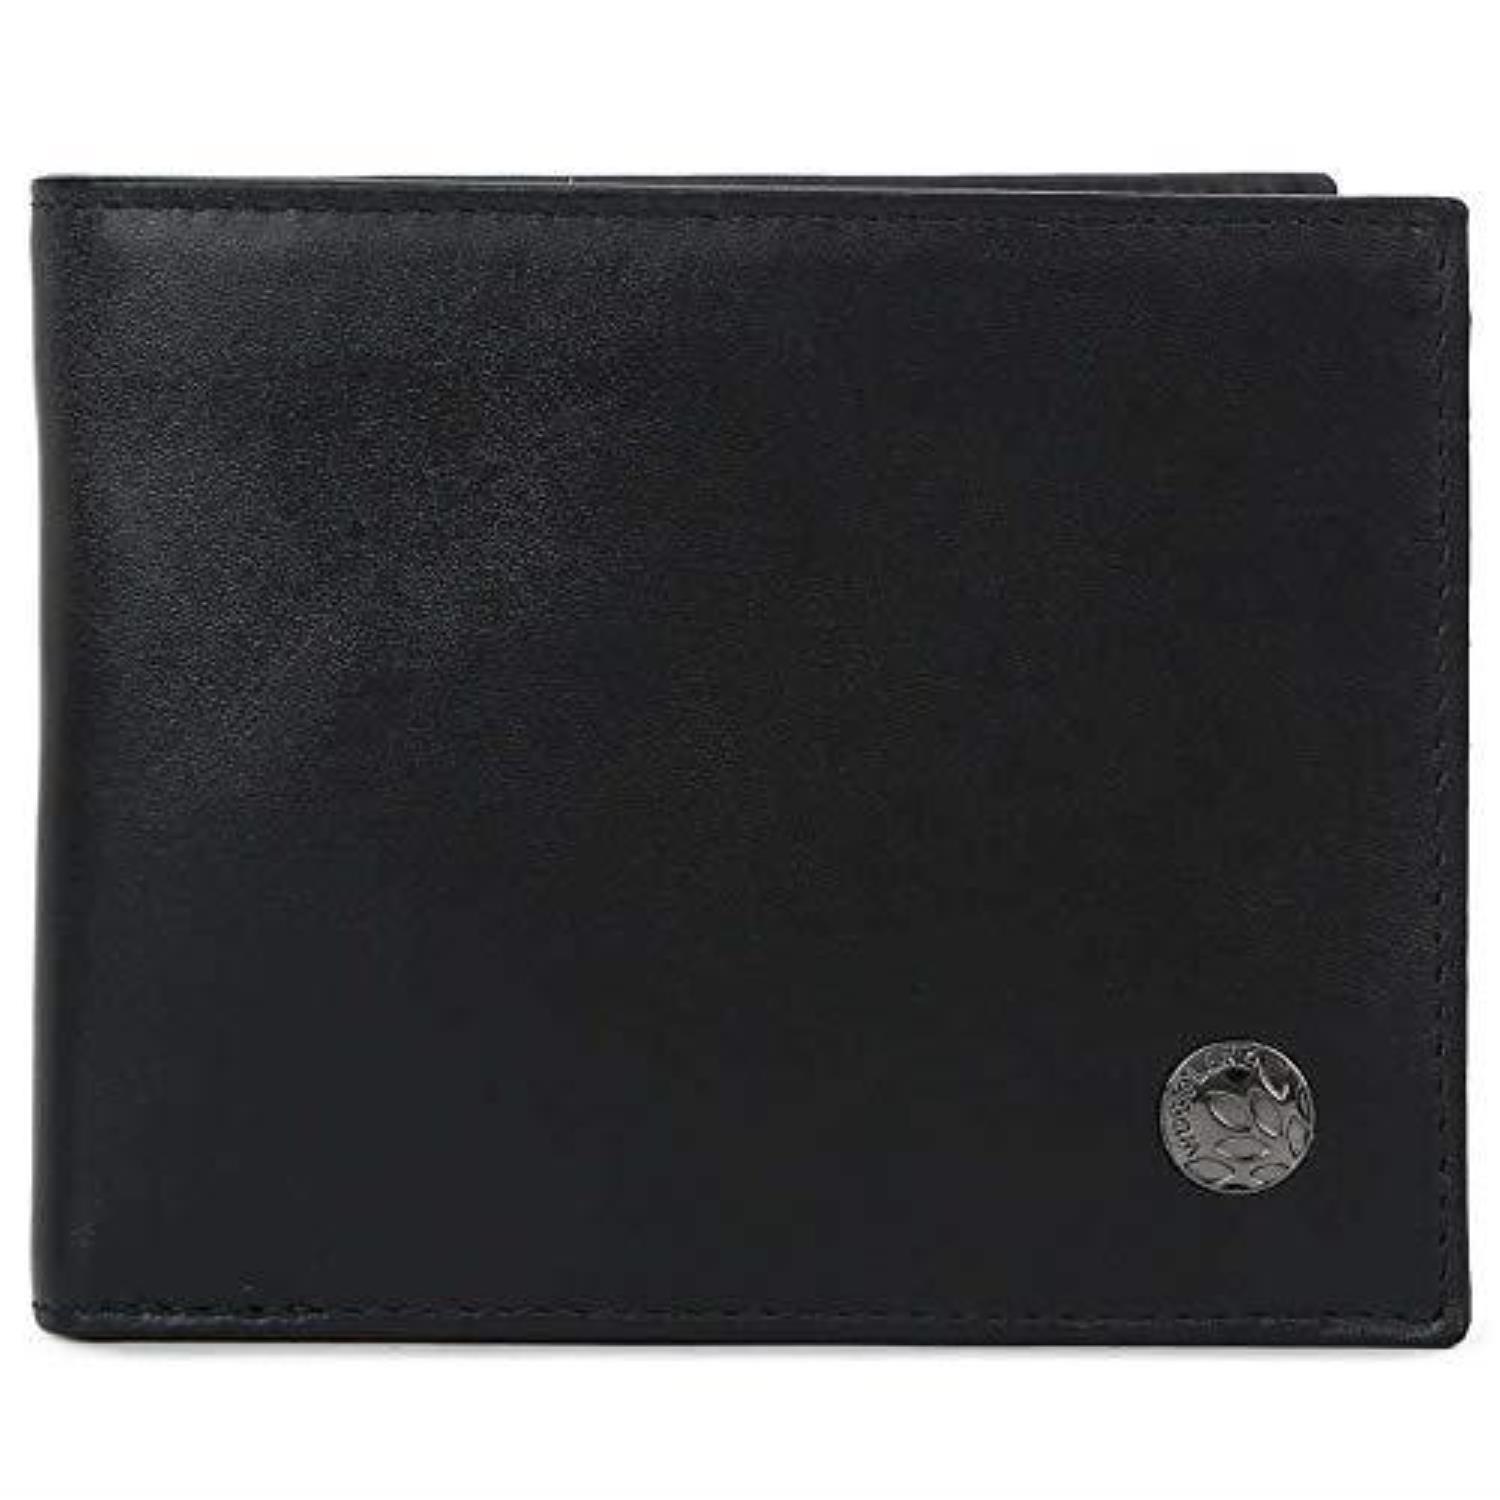 Imported Woodland Leather Wallets for Men » Buy online from